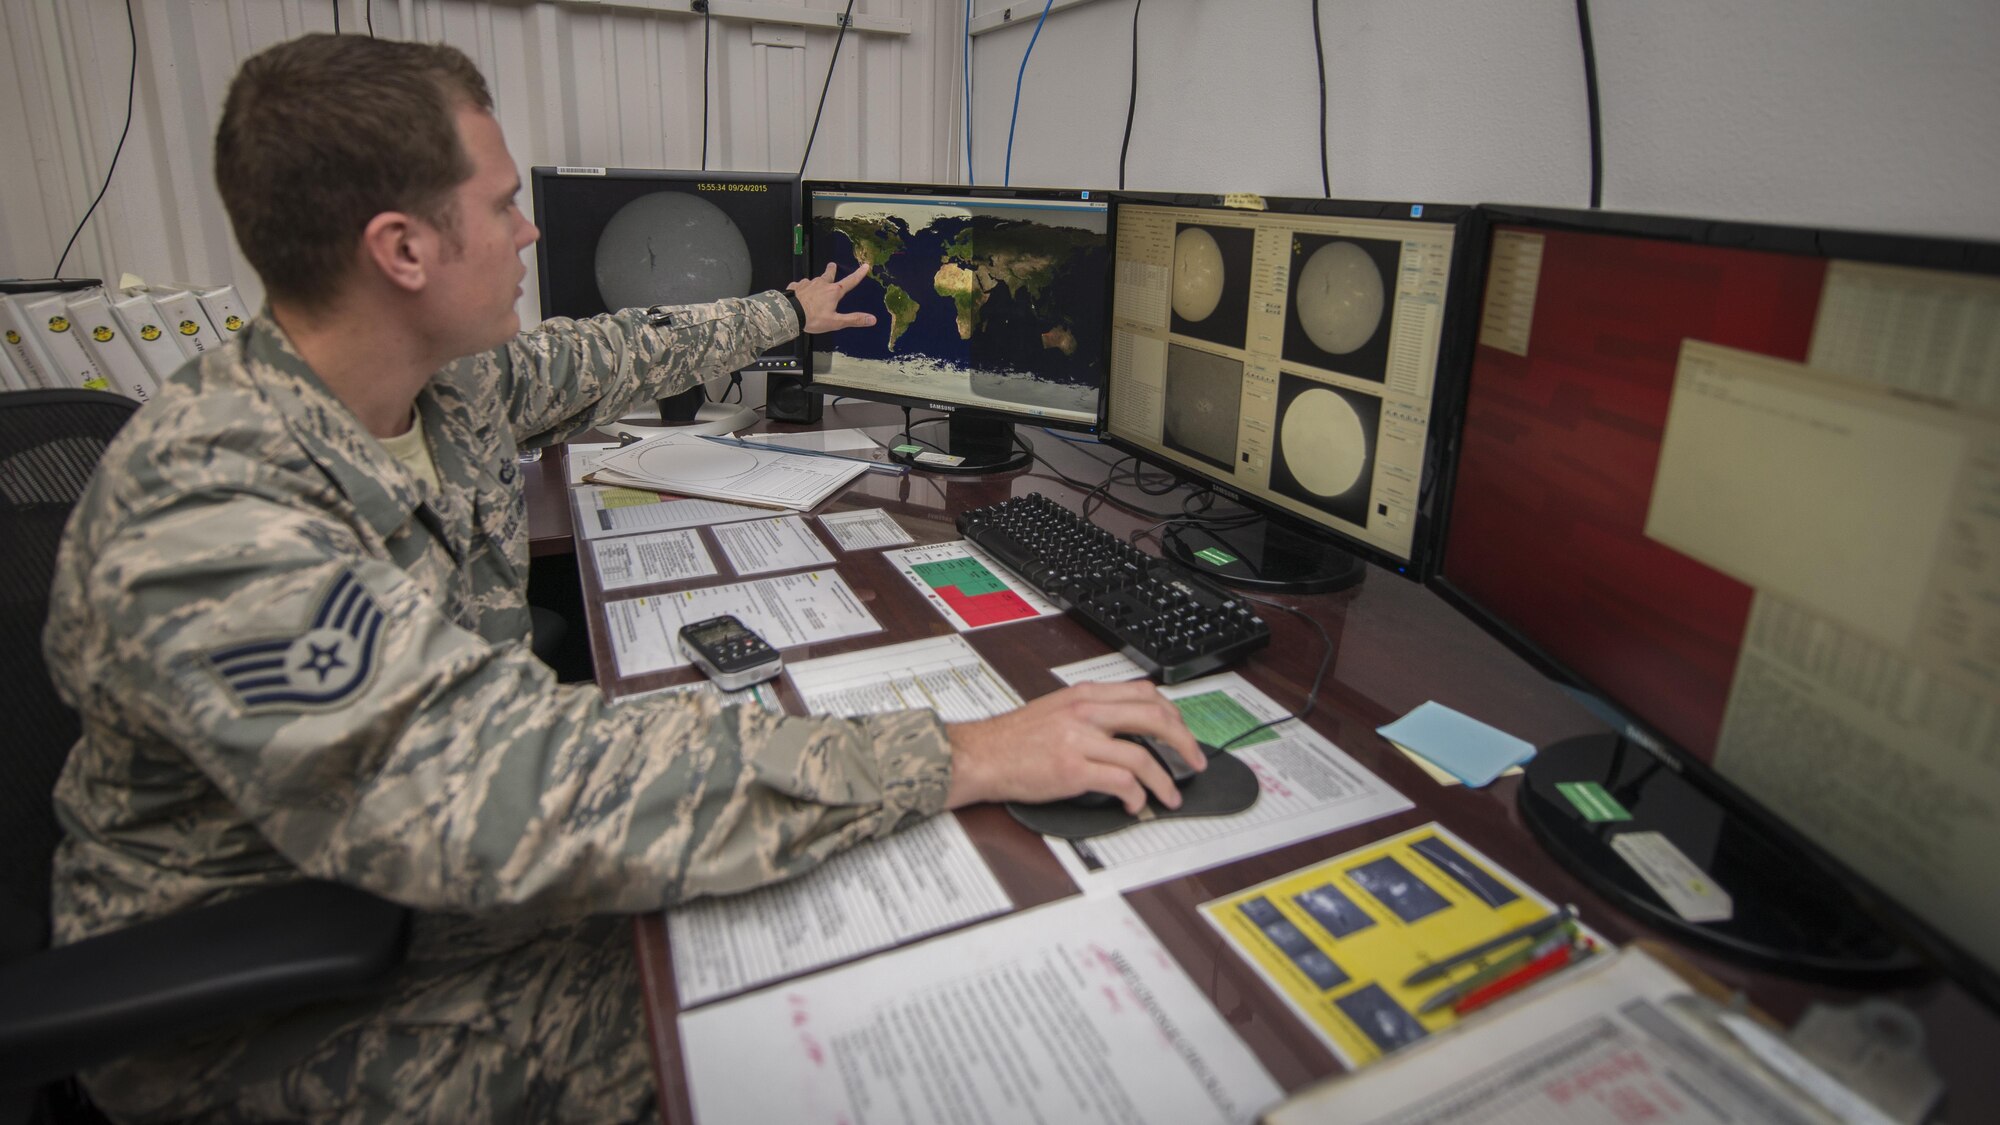 Staff Sgt. Erin O’Connell, a solar analyst with Detachment 2, 2nd Weather Squadron, monitors multiple live readings from the sun at the Holloman Solar Observatory on Holloman Air Force Base, N.M., Sept. 24, 2015. O’Connell was looking for any kind of solar activity that might affect Earth. The solar observatory works jointly with civilian and Defense Department customers who utilize the information in different ways. (U.S. Air Force photo/Senior Airman Aaron Montoya)